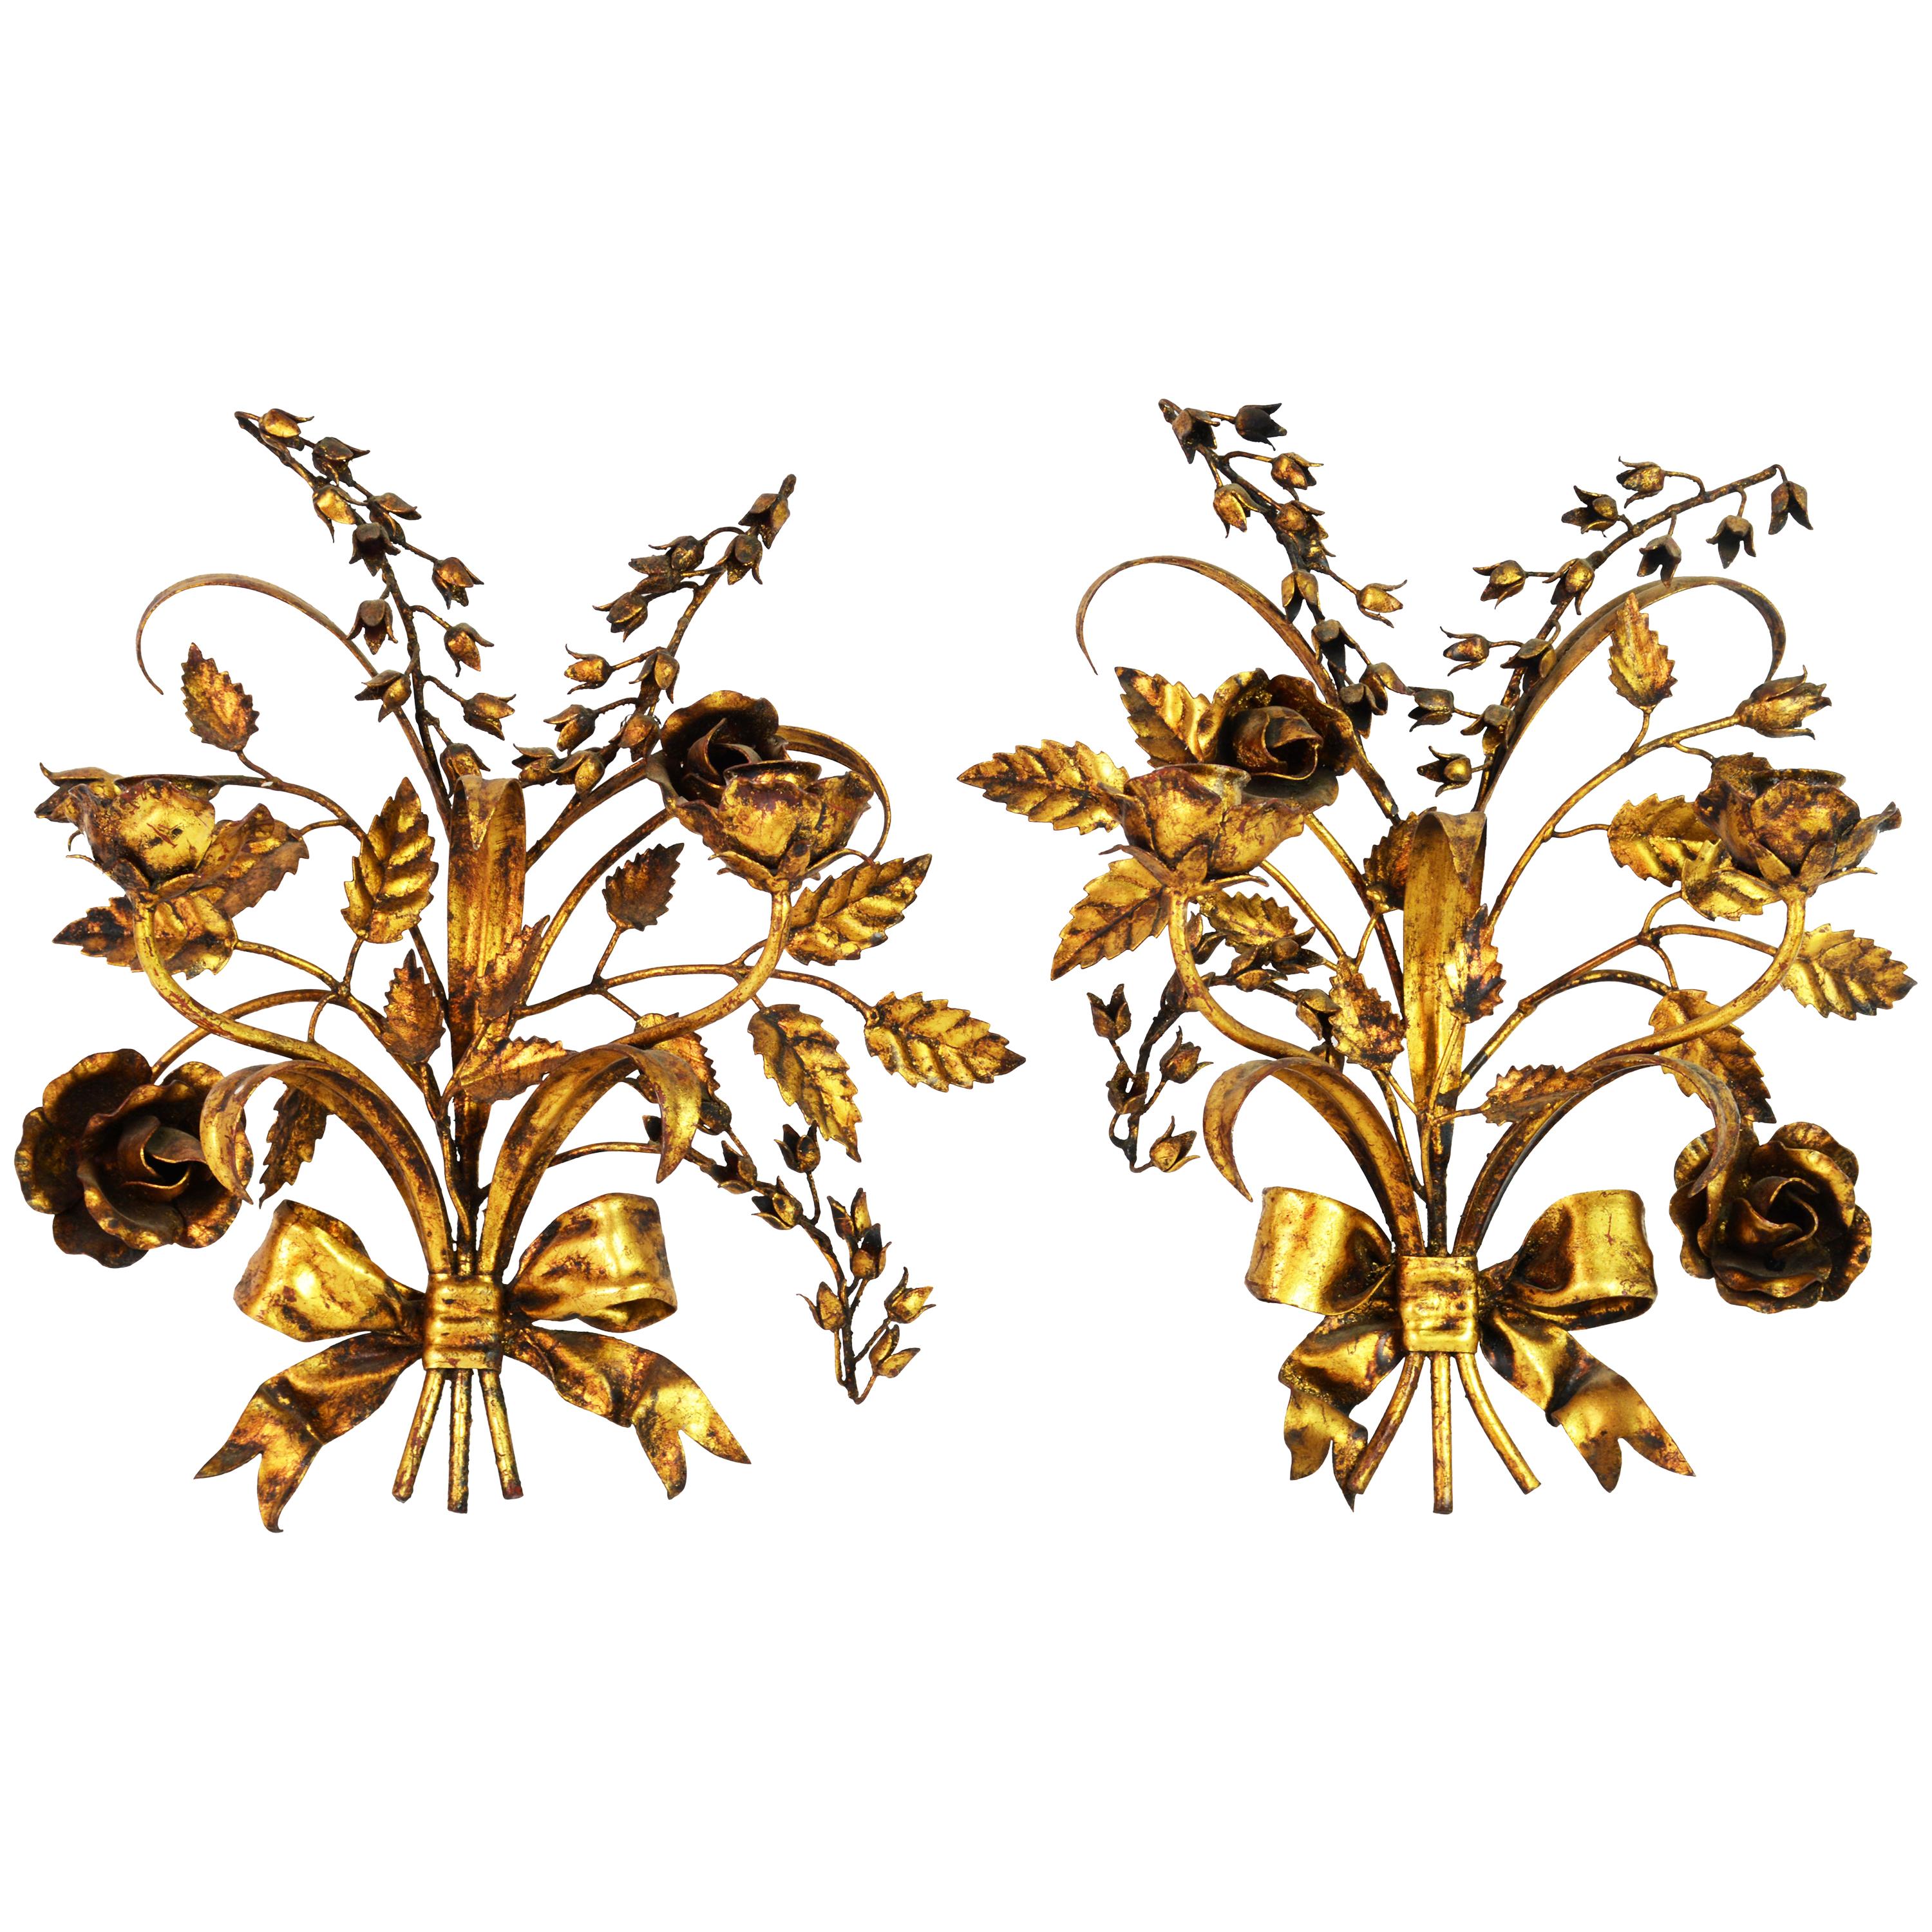 Pair of Two-Arm Midcentury Italian Gilt Tole Flower Sconces with Ribbons